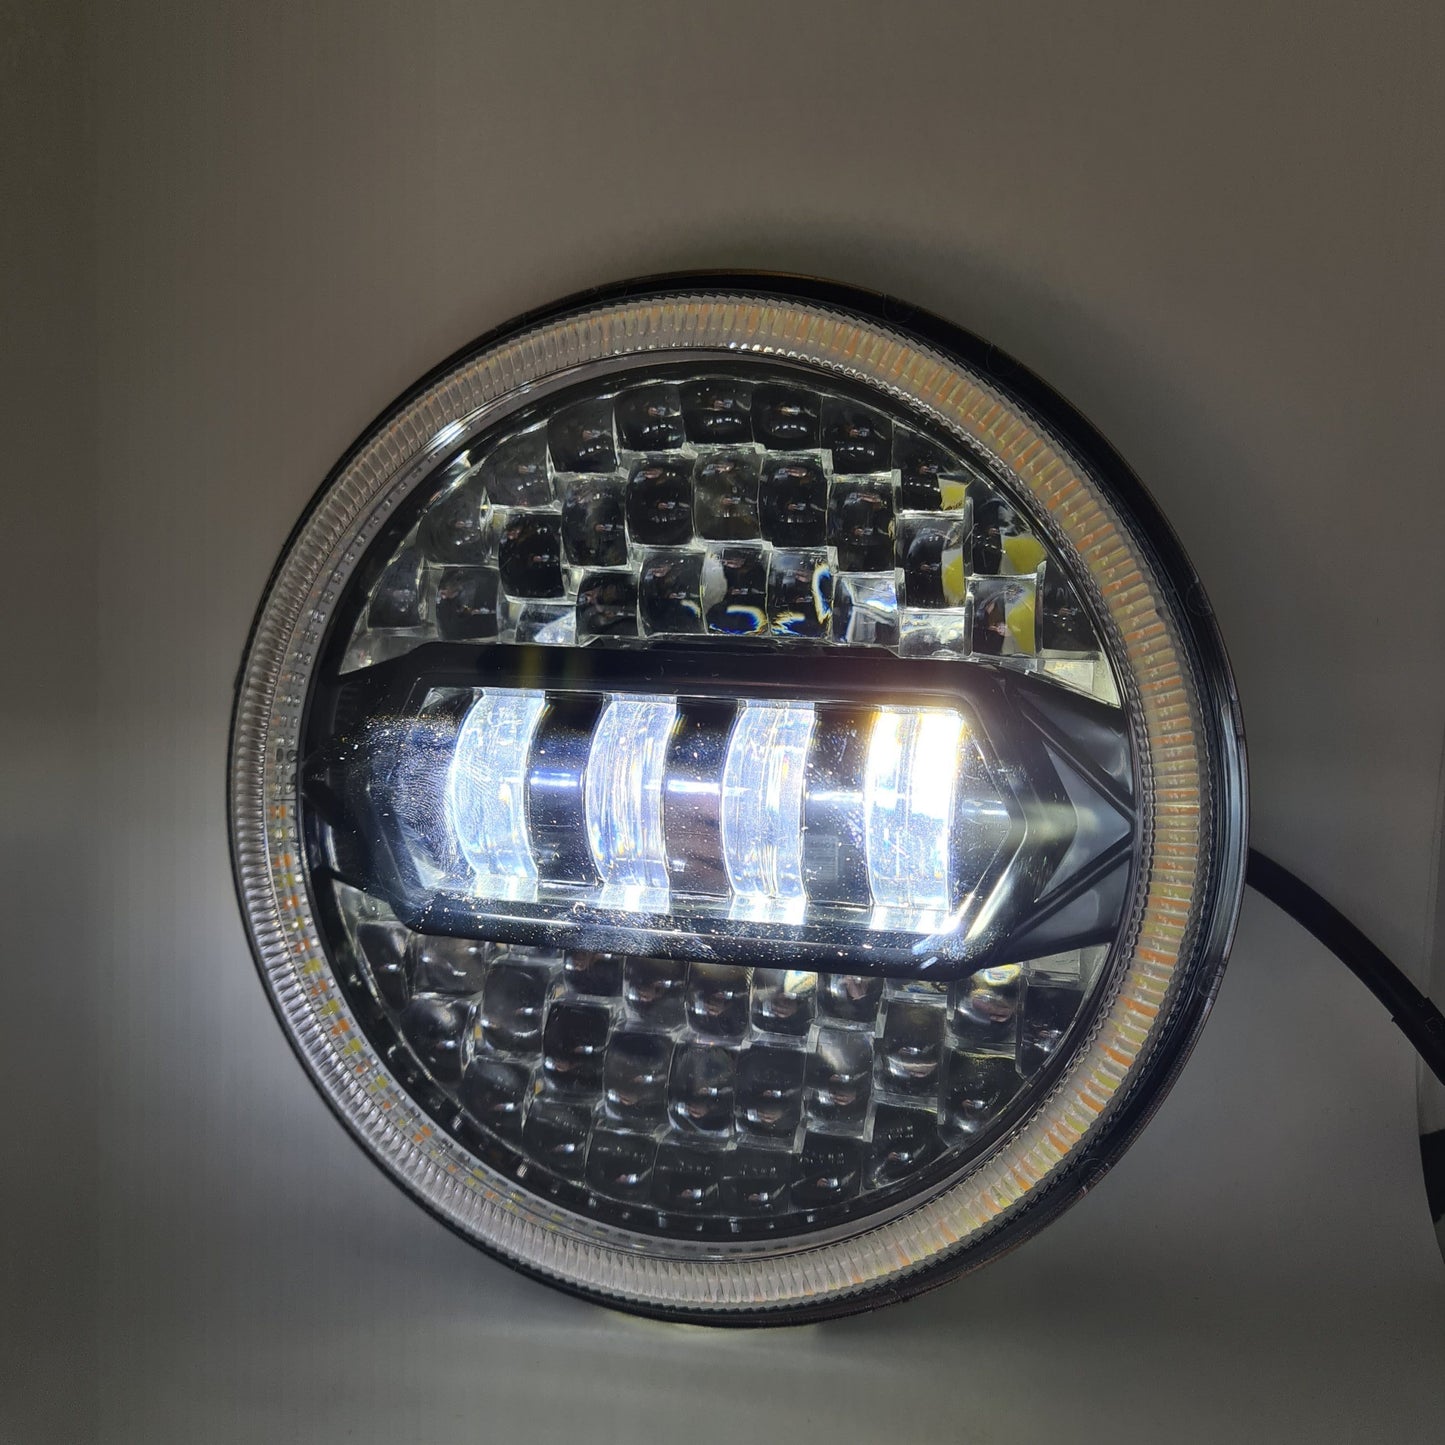 7 Inch Diamond Cut Round Led Headlight Fits in Royal Enfield all model and Mahindra Thar - bikerstore.in